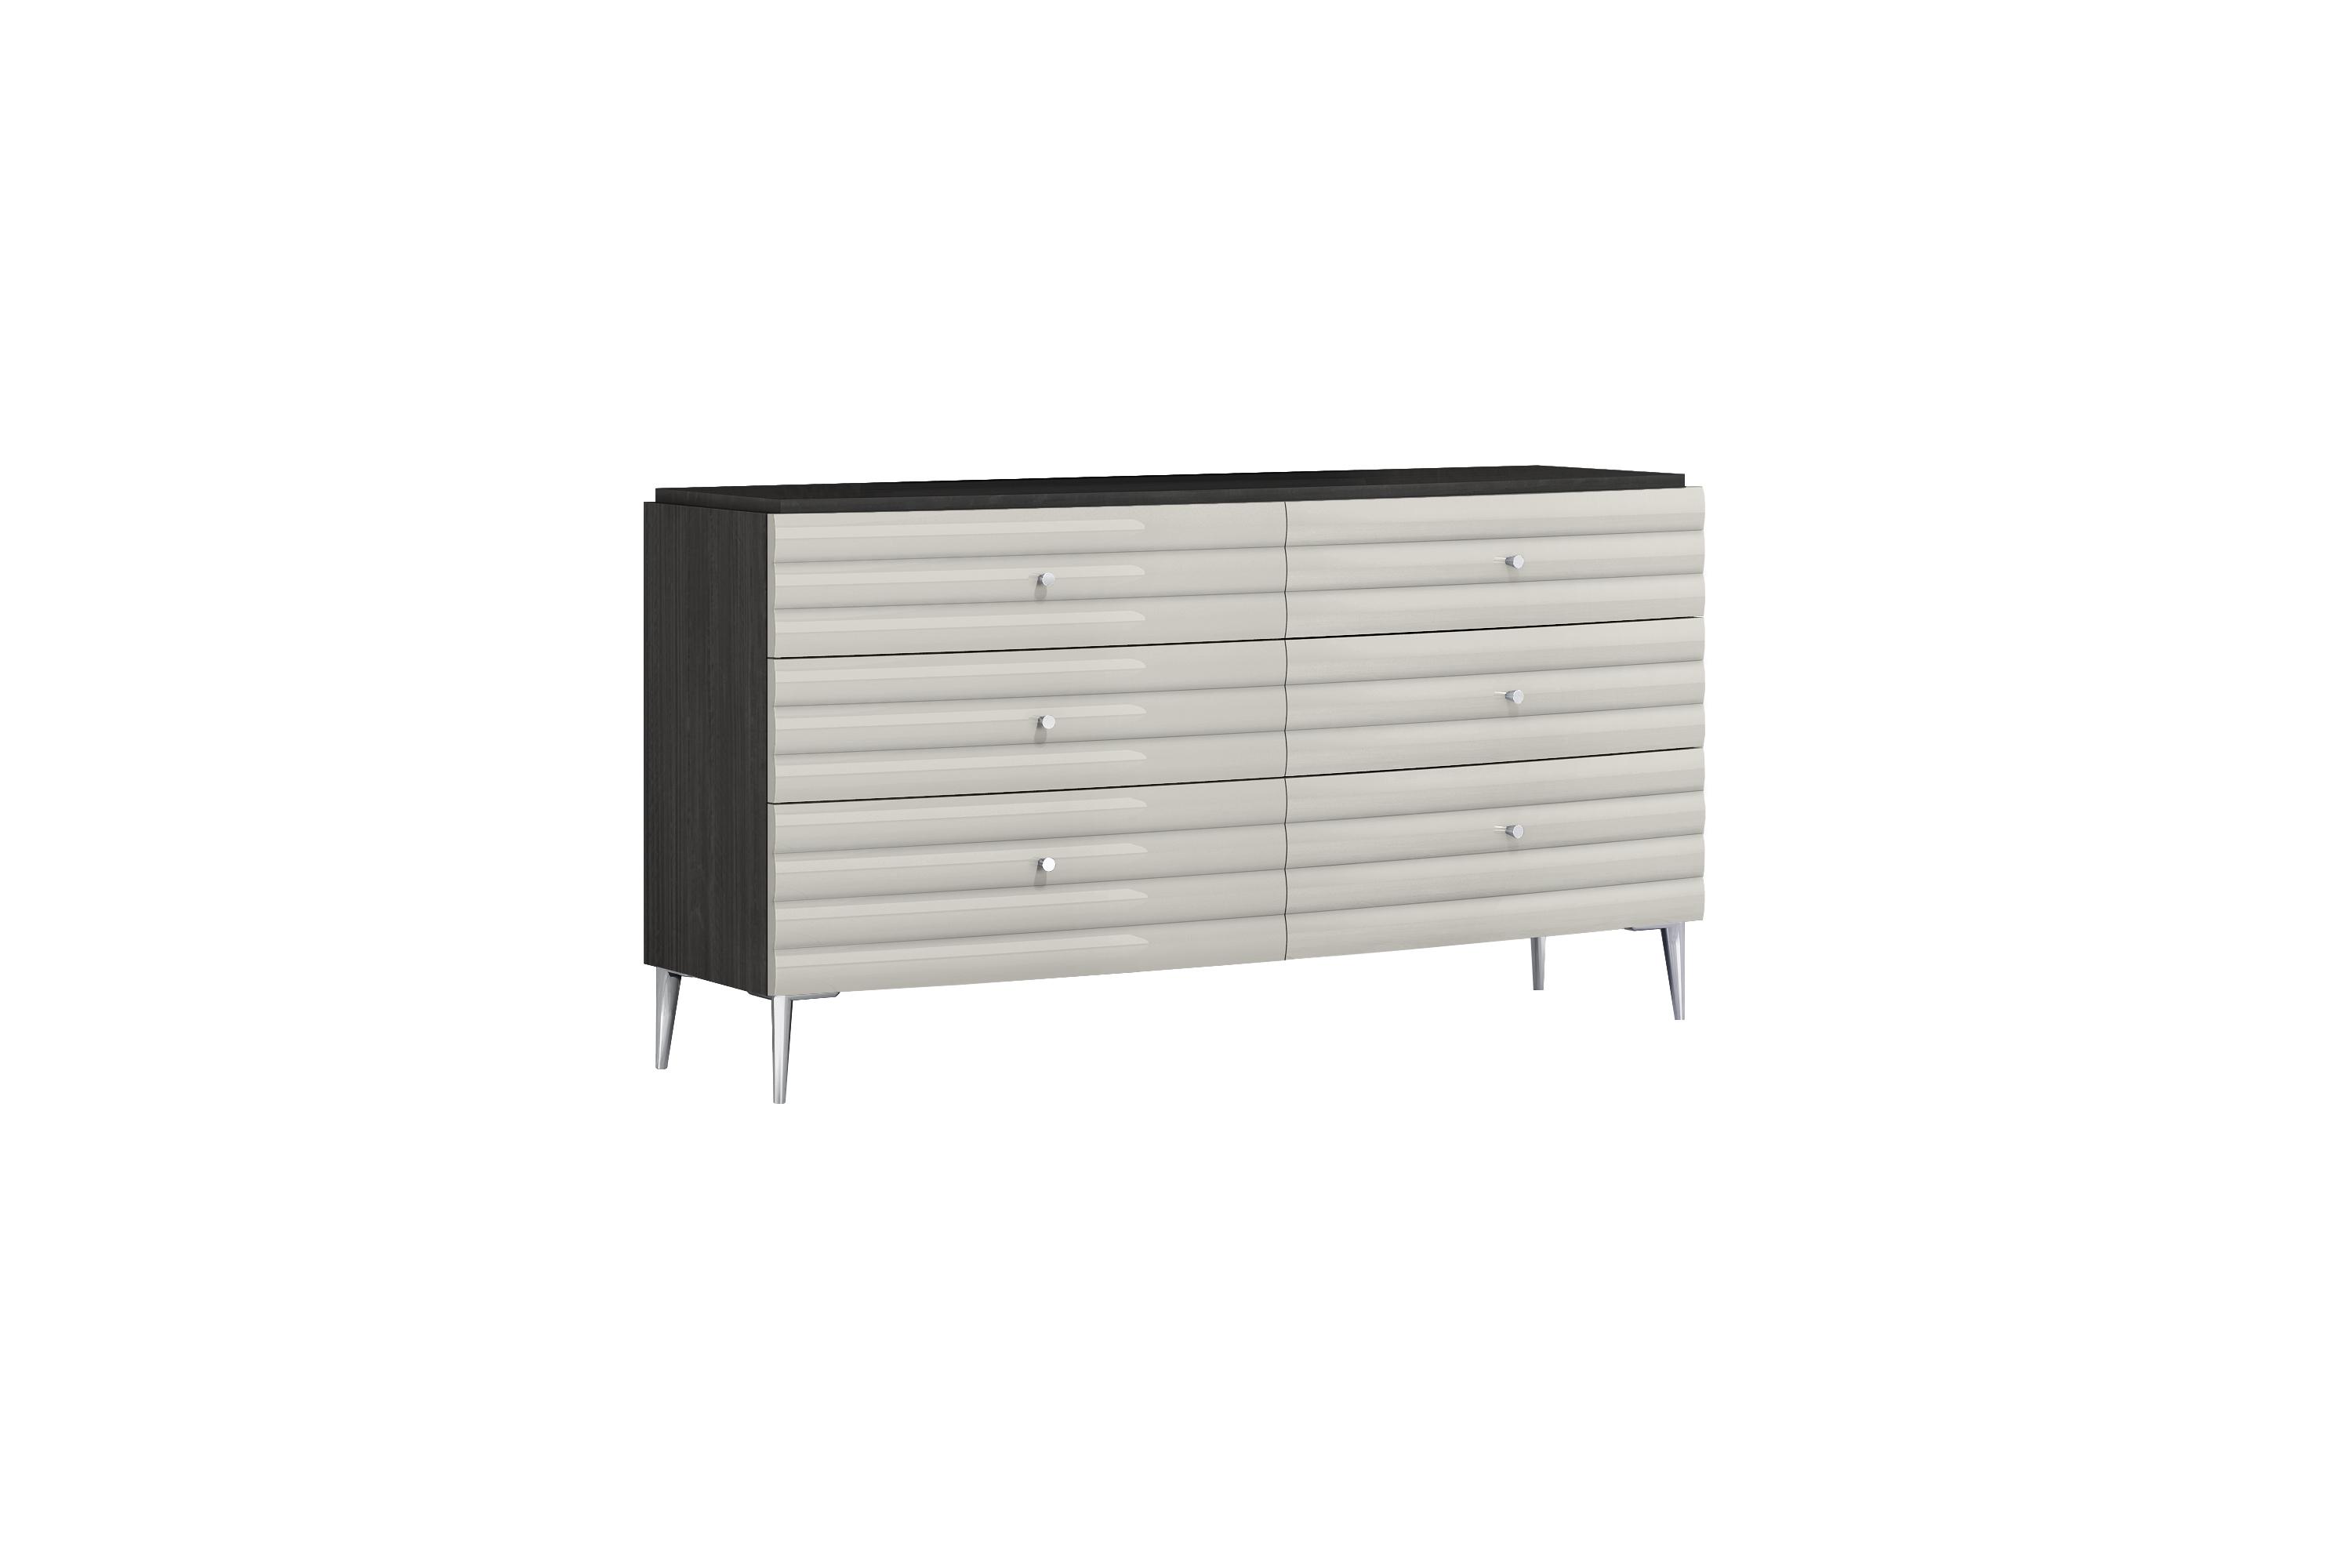 

    
Contemporary High Gloss Dark Gray Solid Wood Dresser WhiteLine DR1752-DGRY/LGRY Pino
